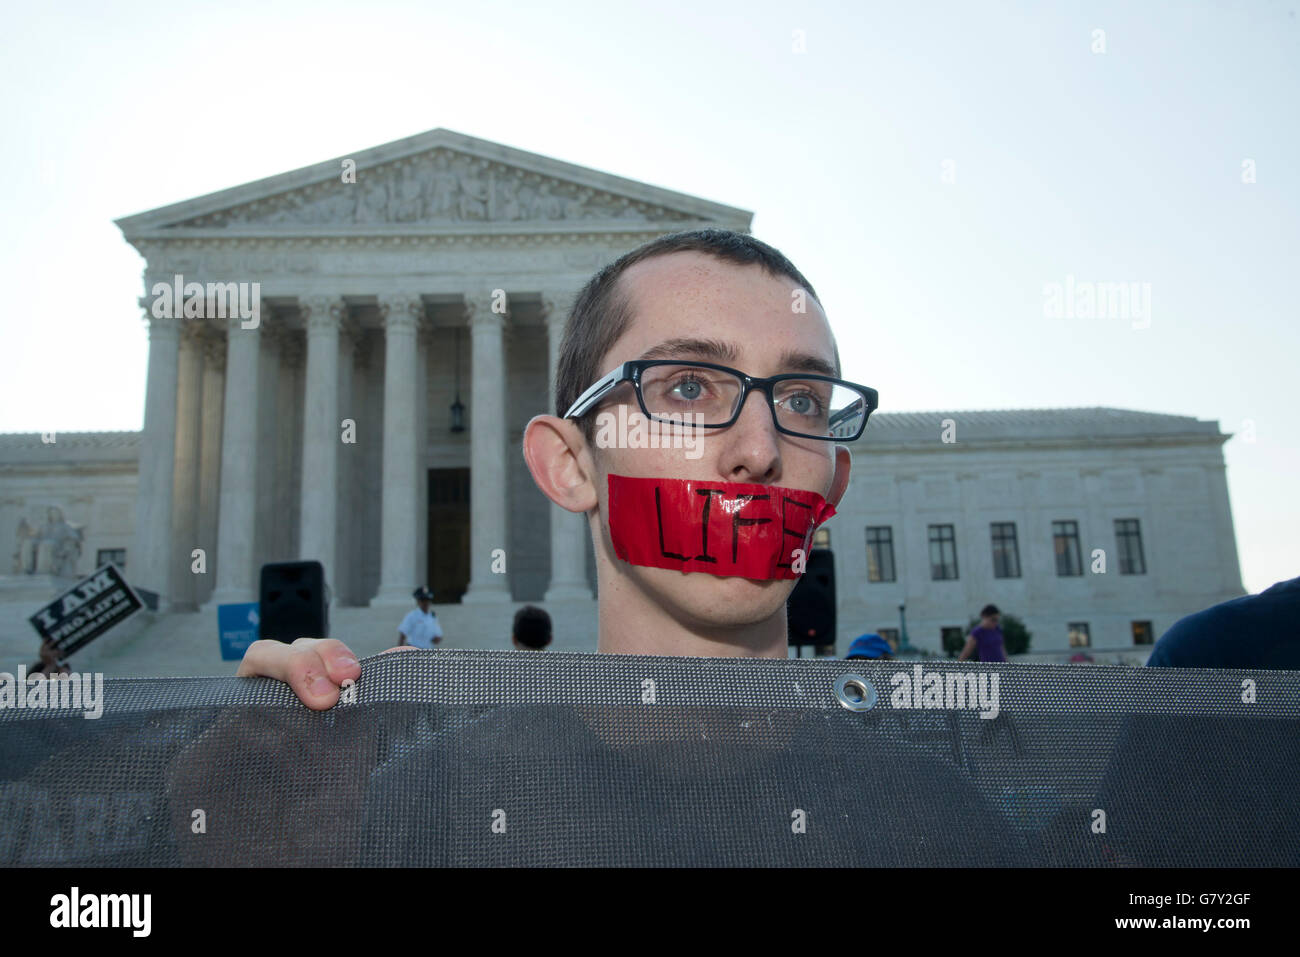 Washington DC, USA. 27th June, 2016. USA-Ryan Orr, a 17 year old pro-life protester stands at the Supreme Court.  Pro-Life and Pro-Choice advocates protest at the Supreme Court in Washington DC in anticipation of the Supreme Court 's ruling on free access to abortion.  The Supreme Court ruled 5-3 to abolish Texas's abortion laws for clinics. Credit:  Patsy Lynch/Alamy Live News Stock Photo